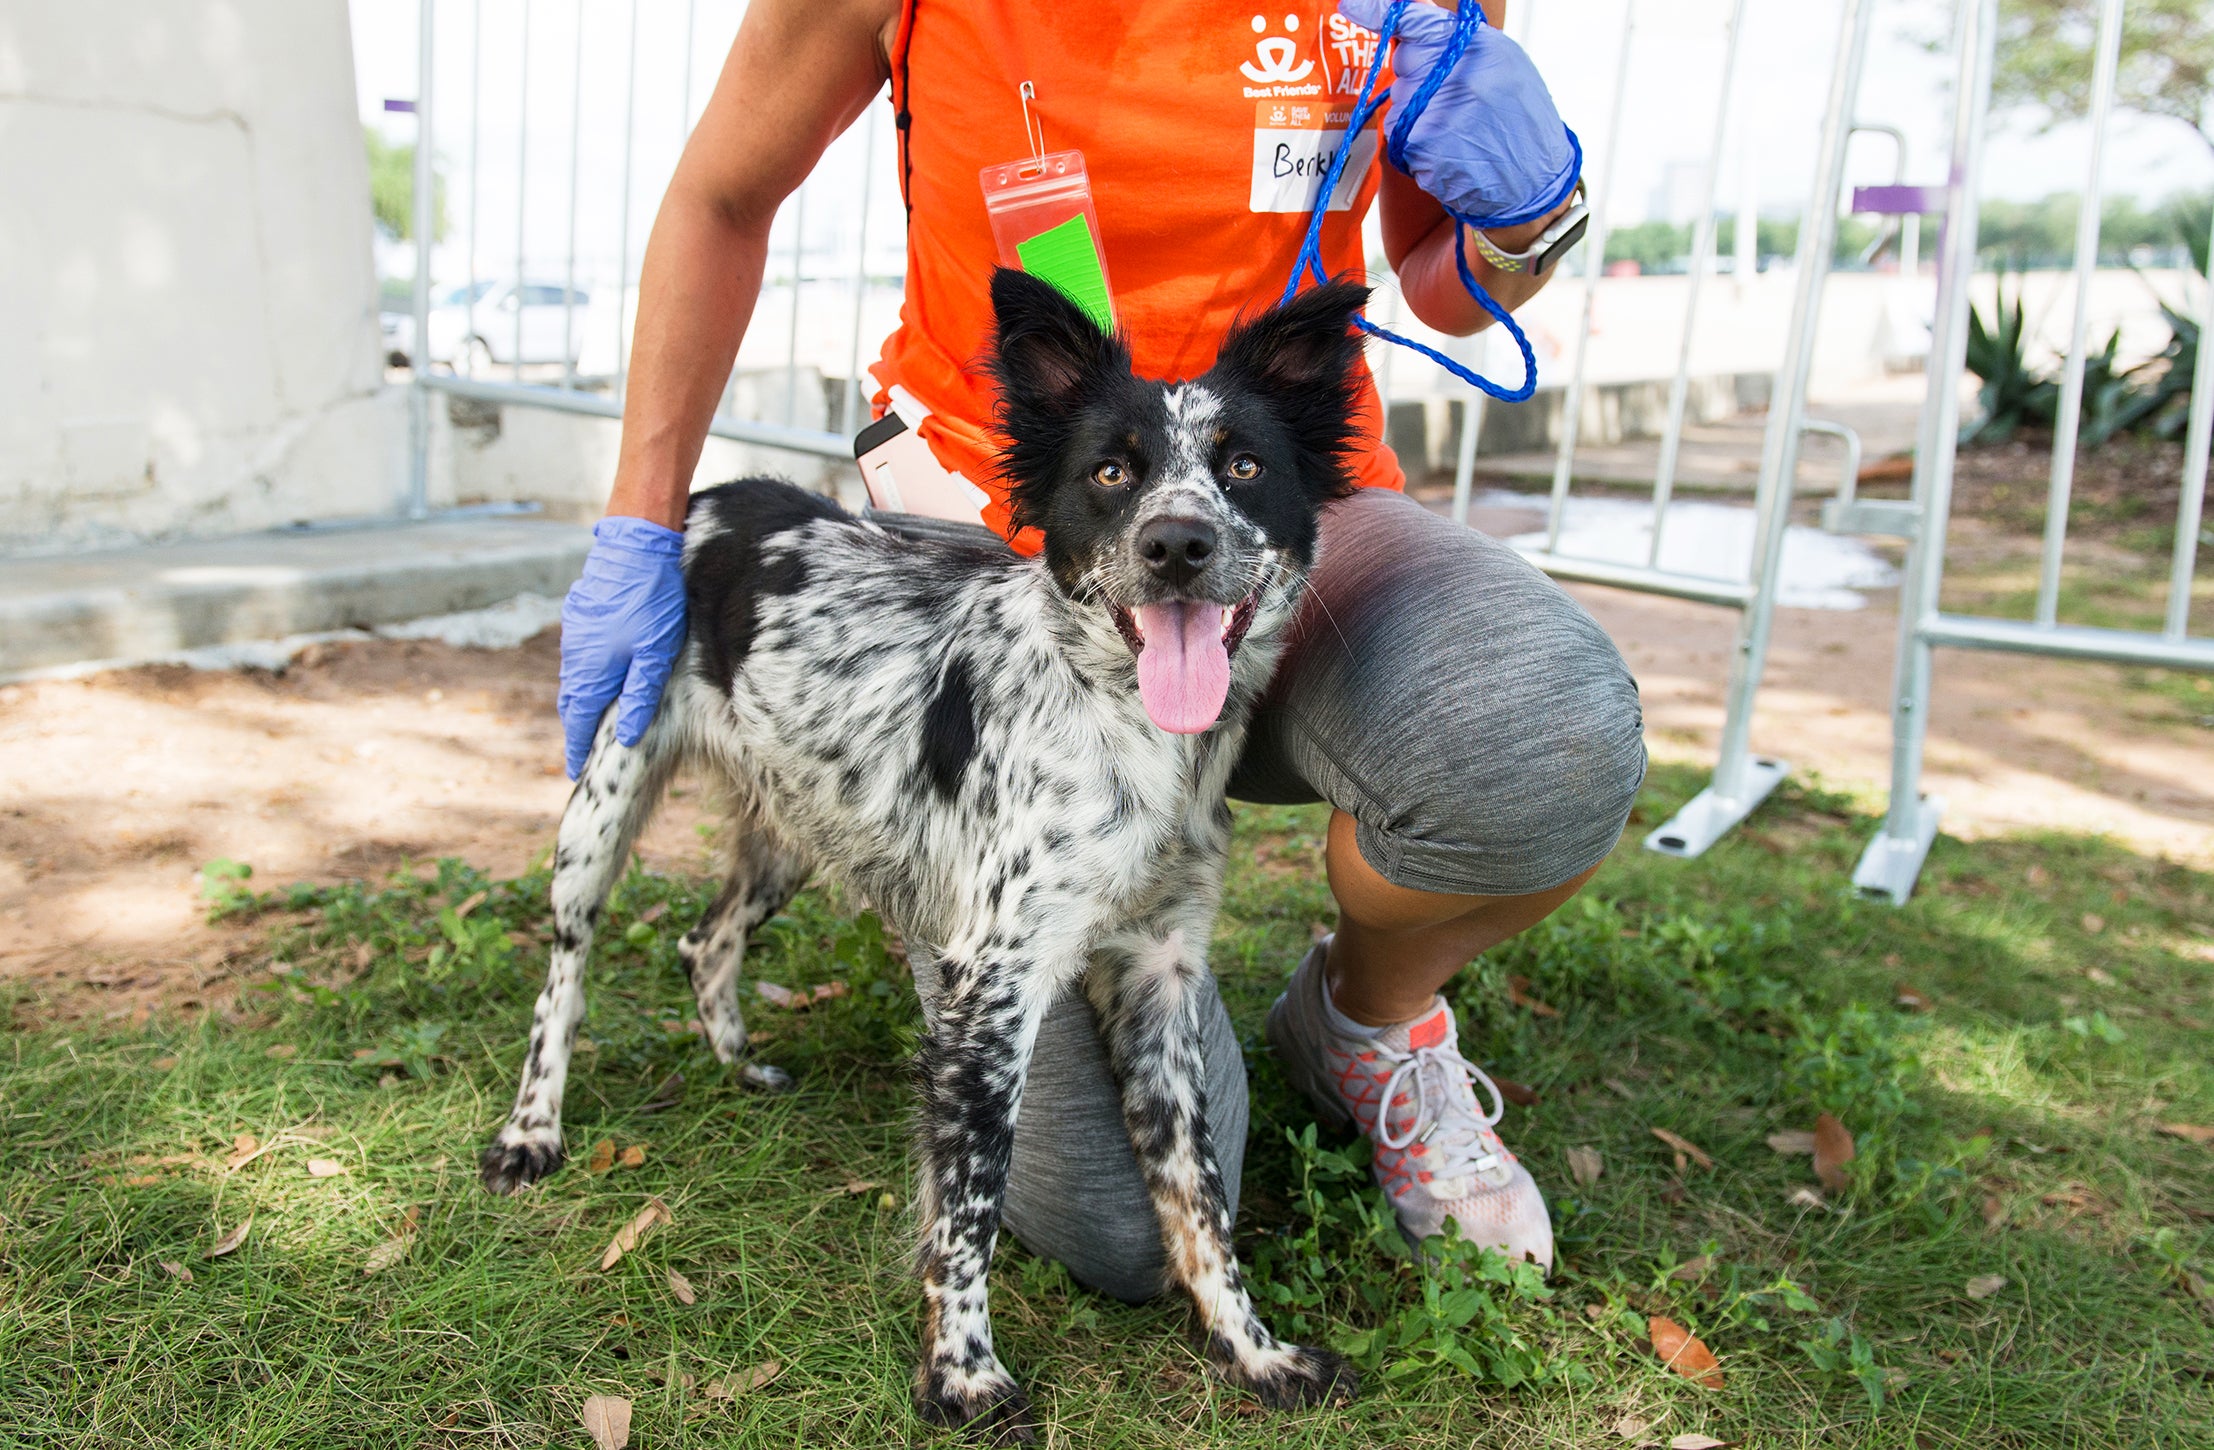 Person wearing Best Friends orange T-shirt and rubber gloves with hand on a happy black and white dog